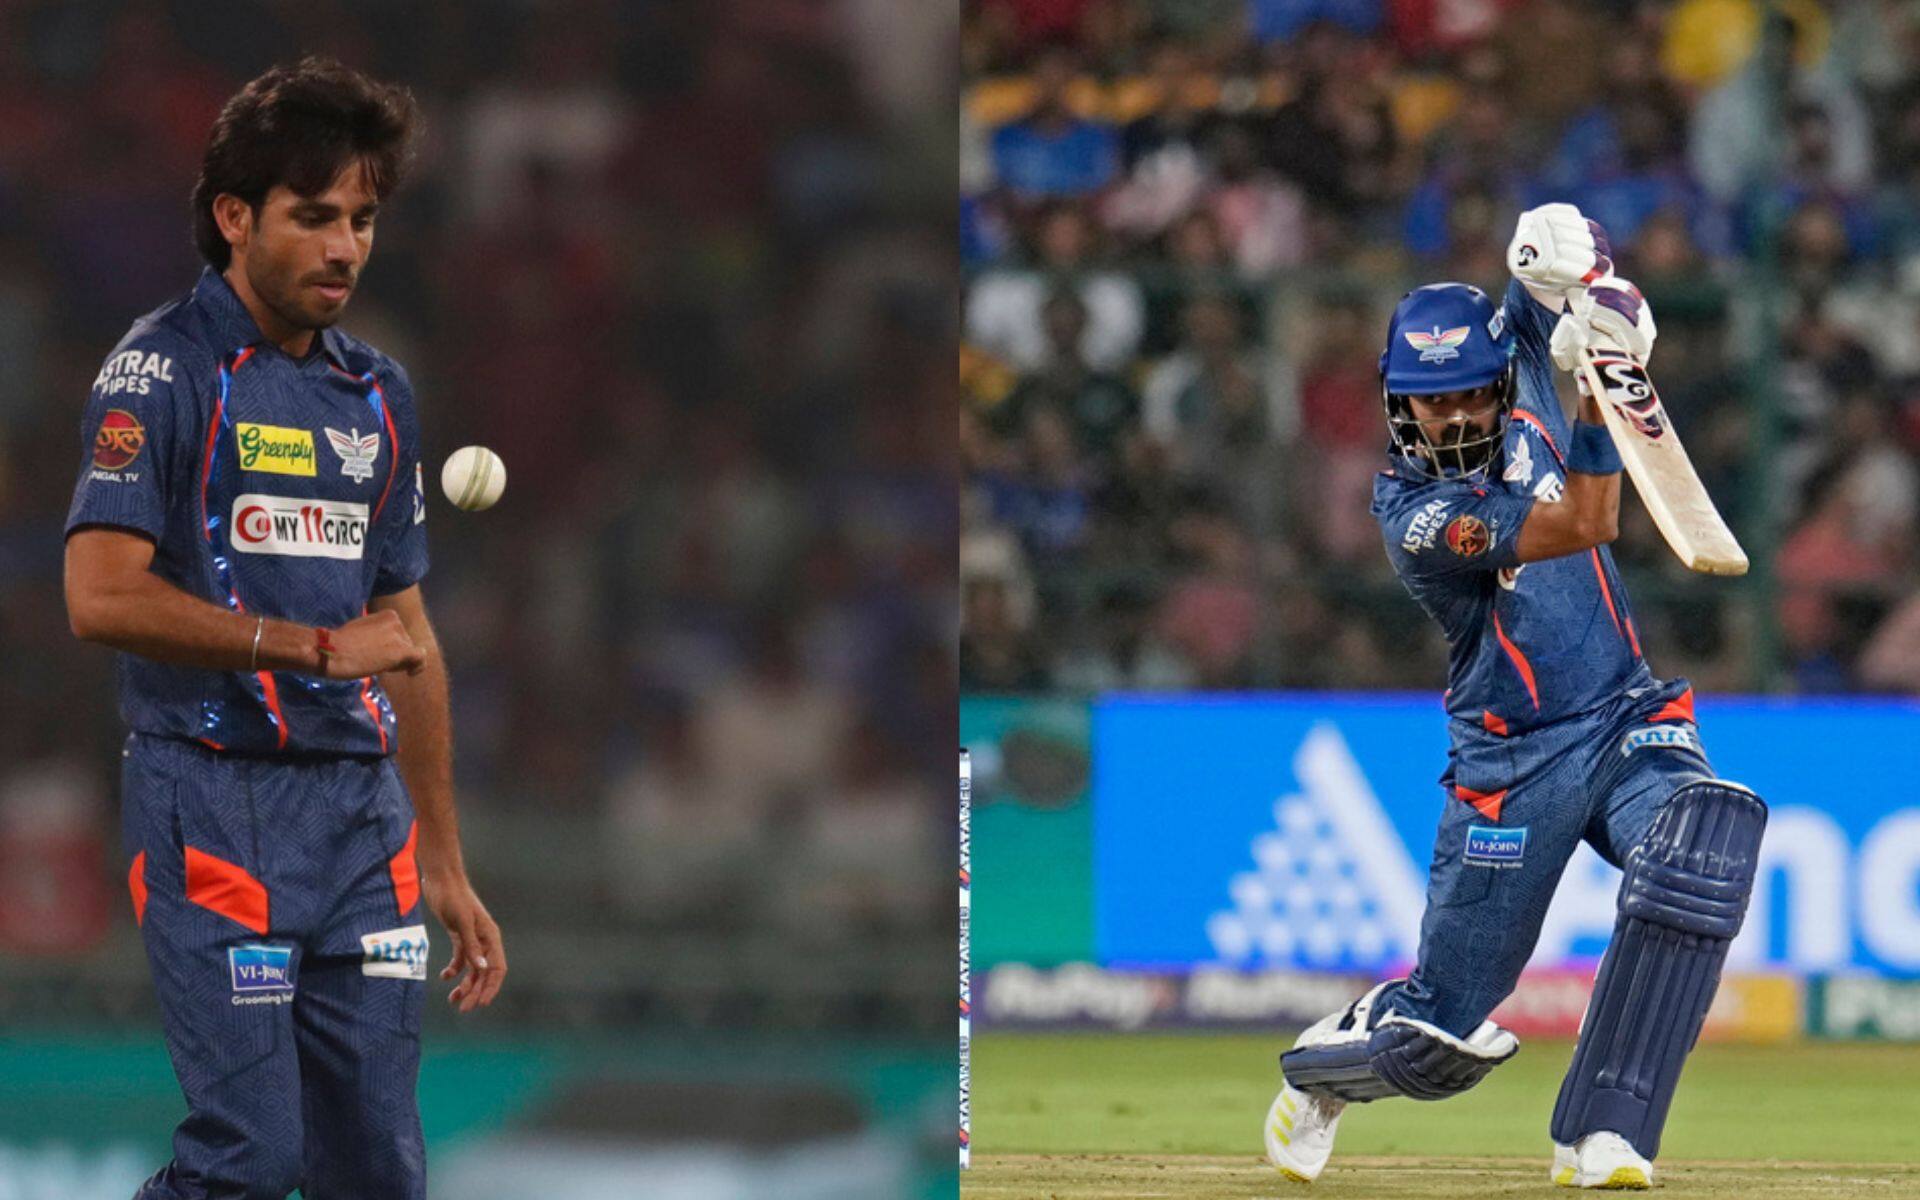 Ravi Bishnoi and KL Rahul will be important for the Super Giants in the match [AP Photos]